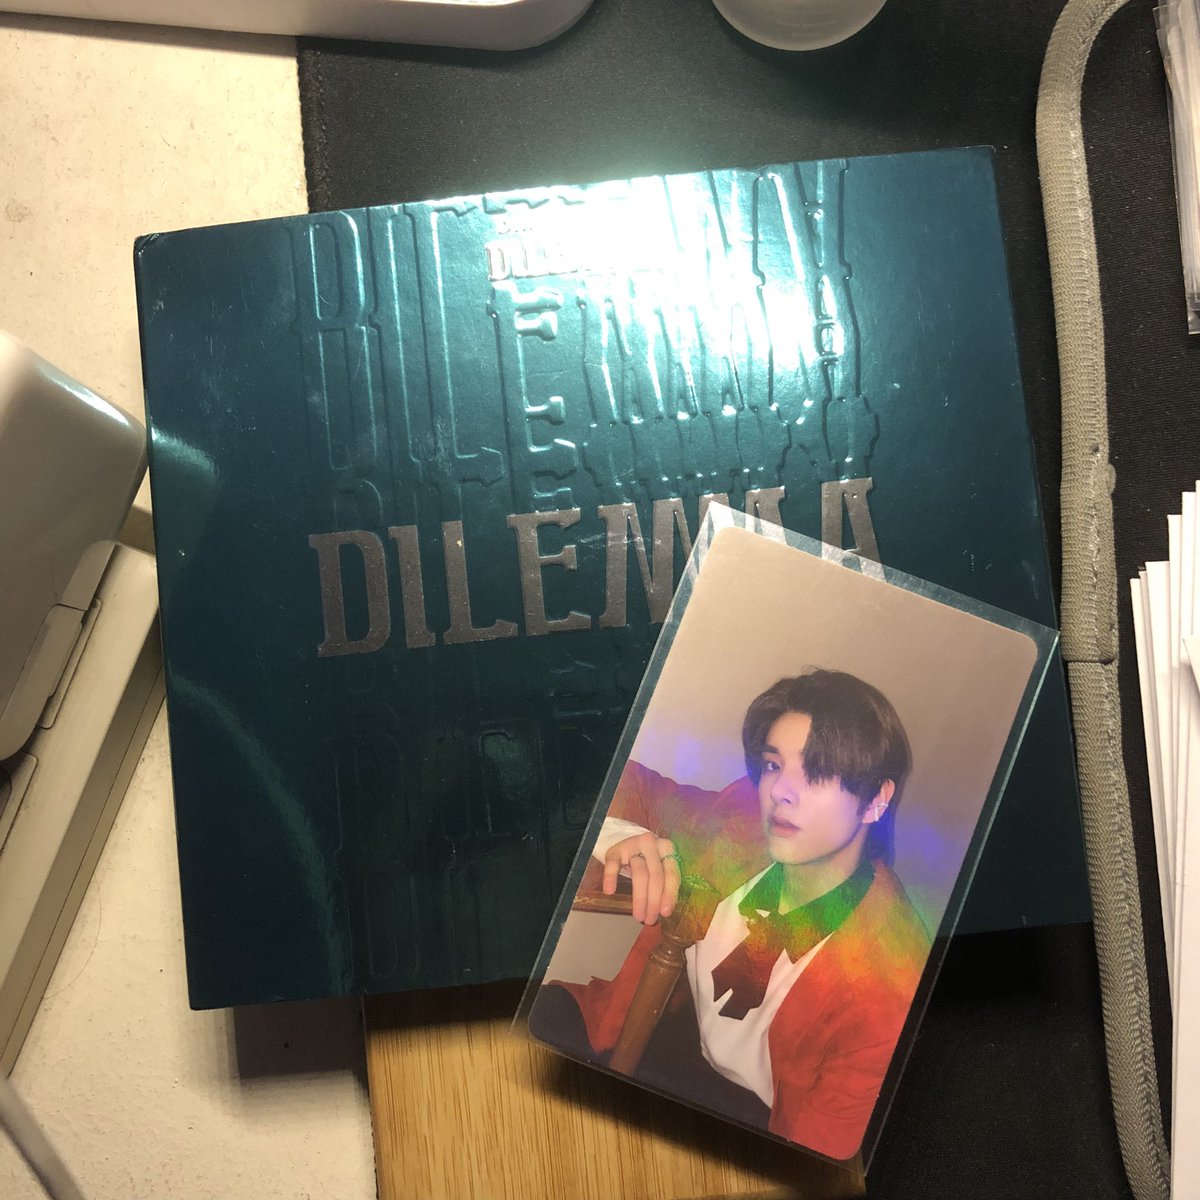 free claim giveaway! 🫀 1 winner of jake pc + d:d dilemma unsealed album! — mbf, rt & like — show proof — ends on: September 20 goodluck! 🐙